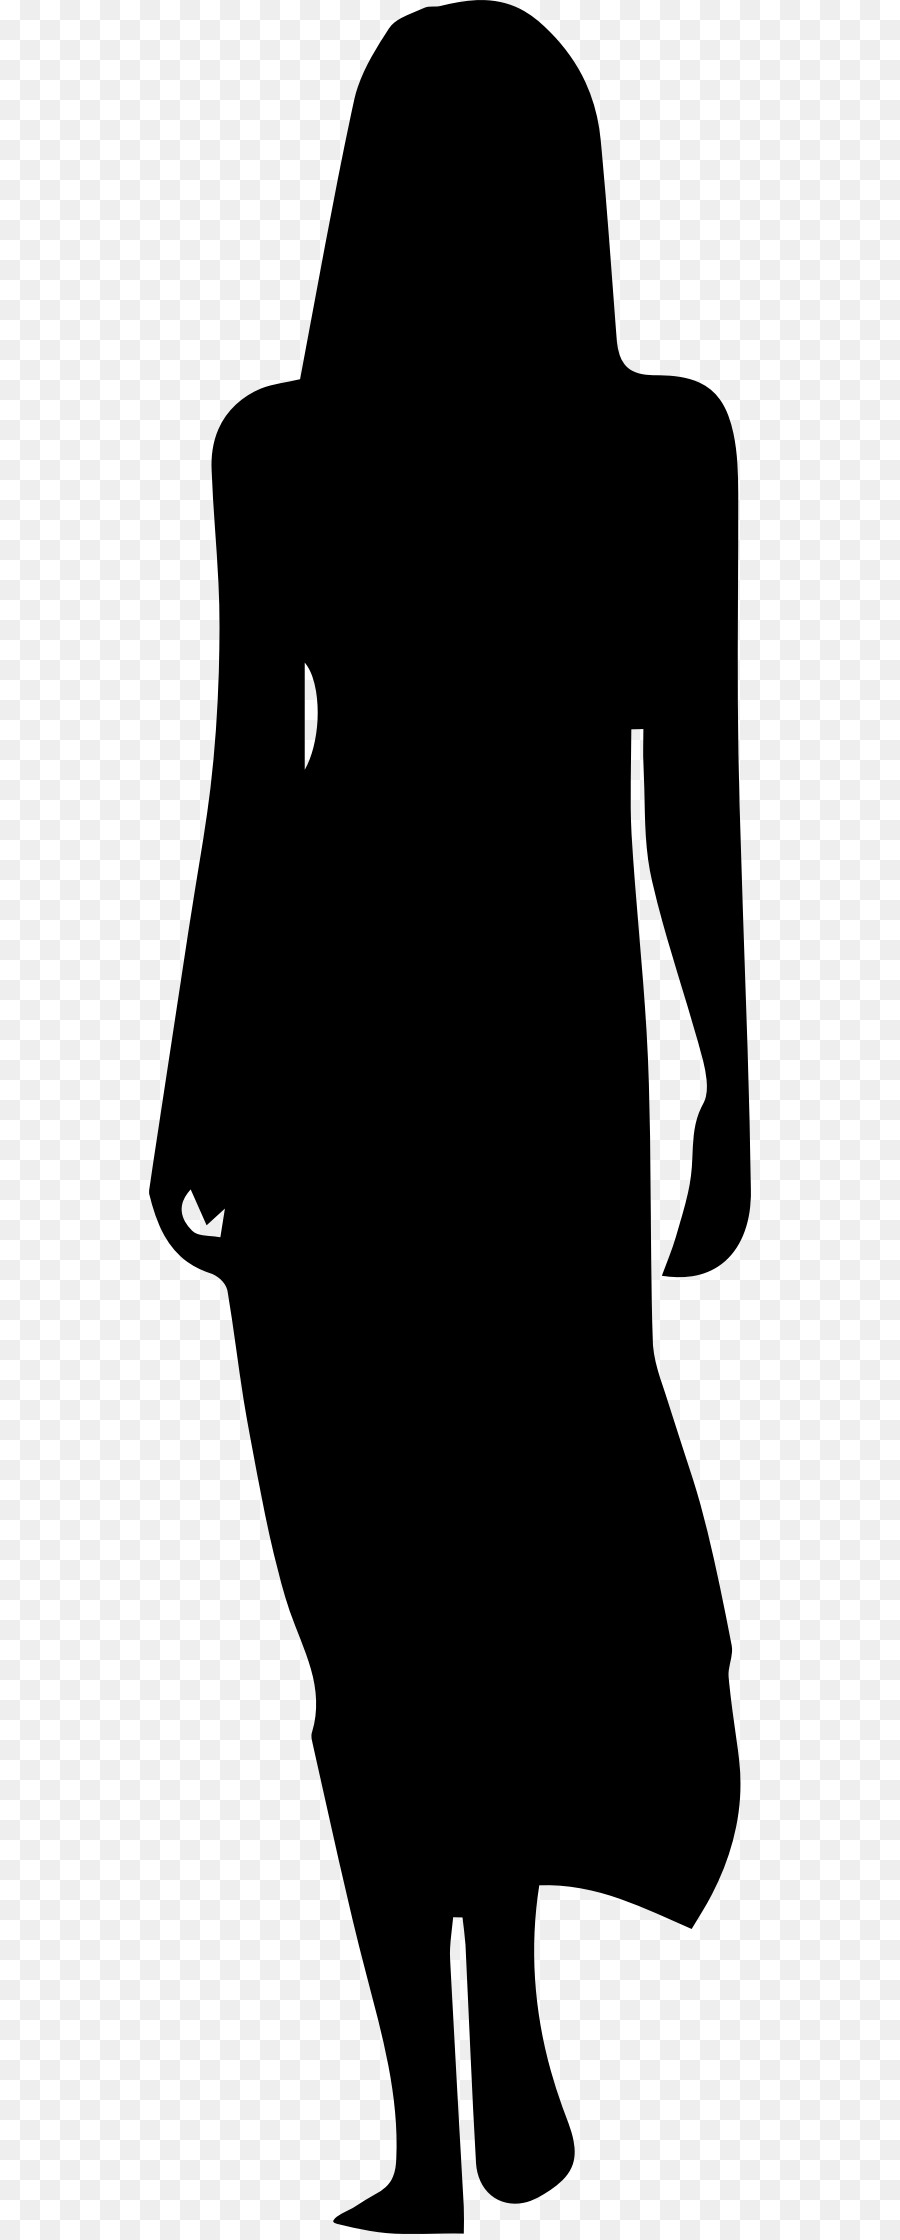 Silhouette Wedding dress Woman Clip art - invisible woman png download - 602*2234 - Free Transparent Silhouette png Download.